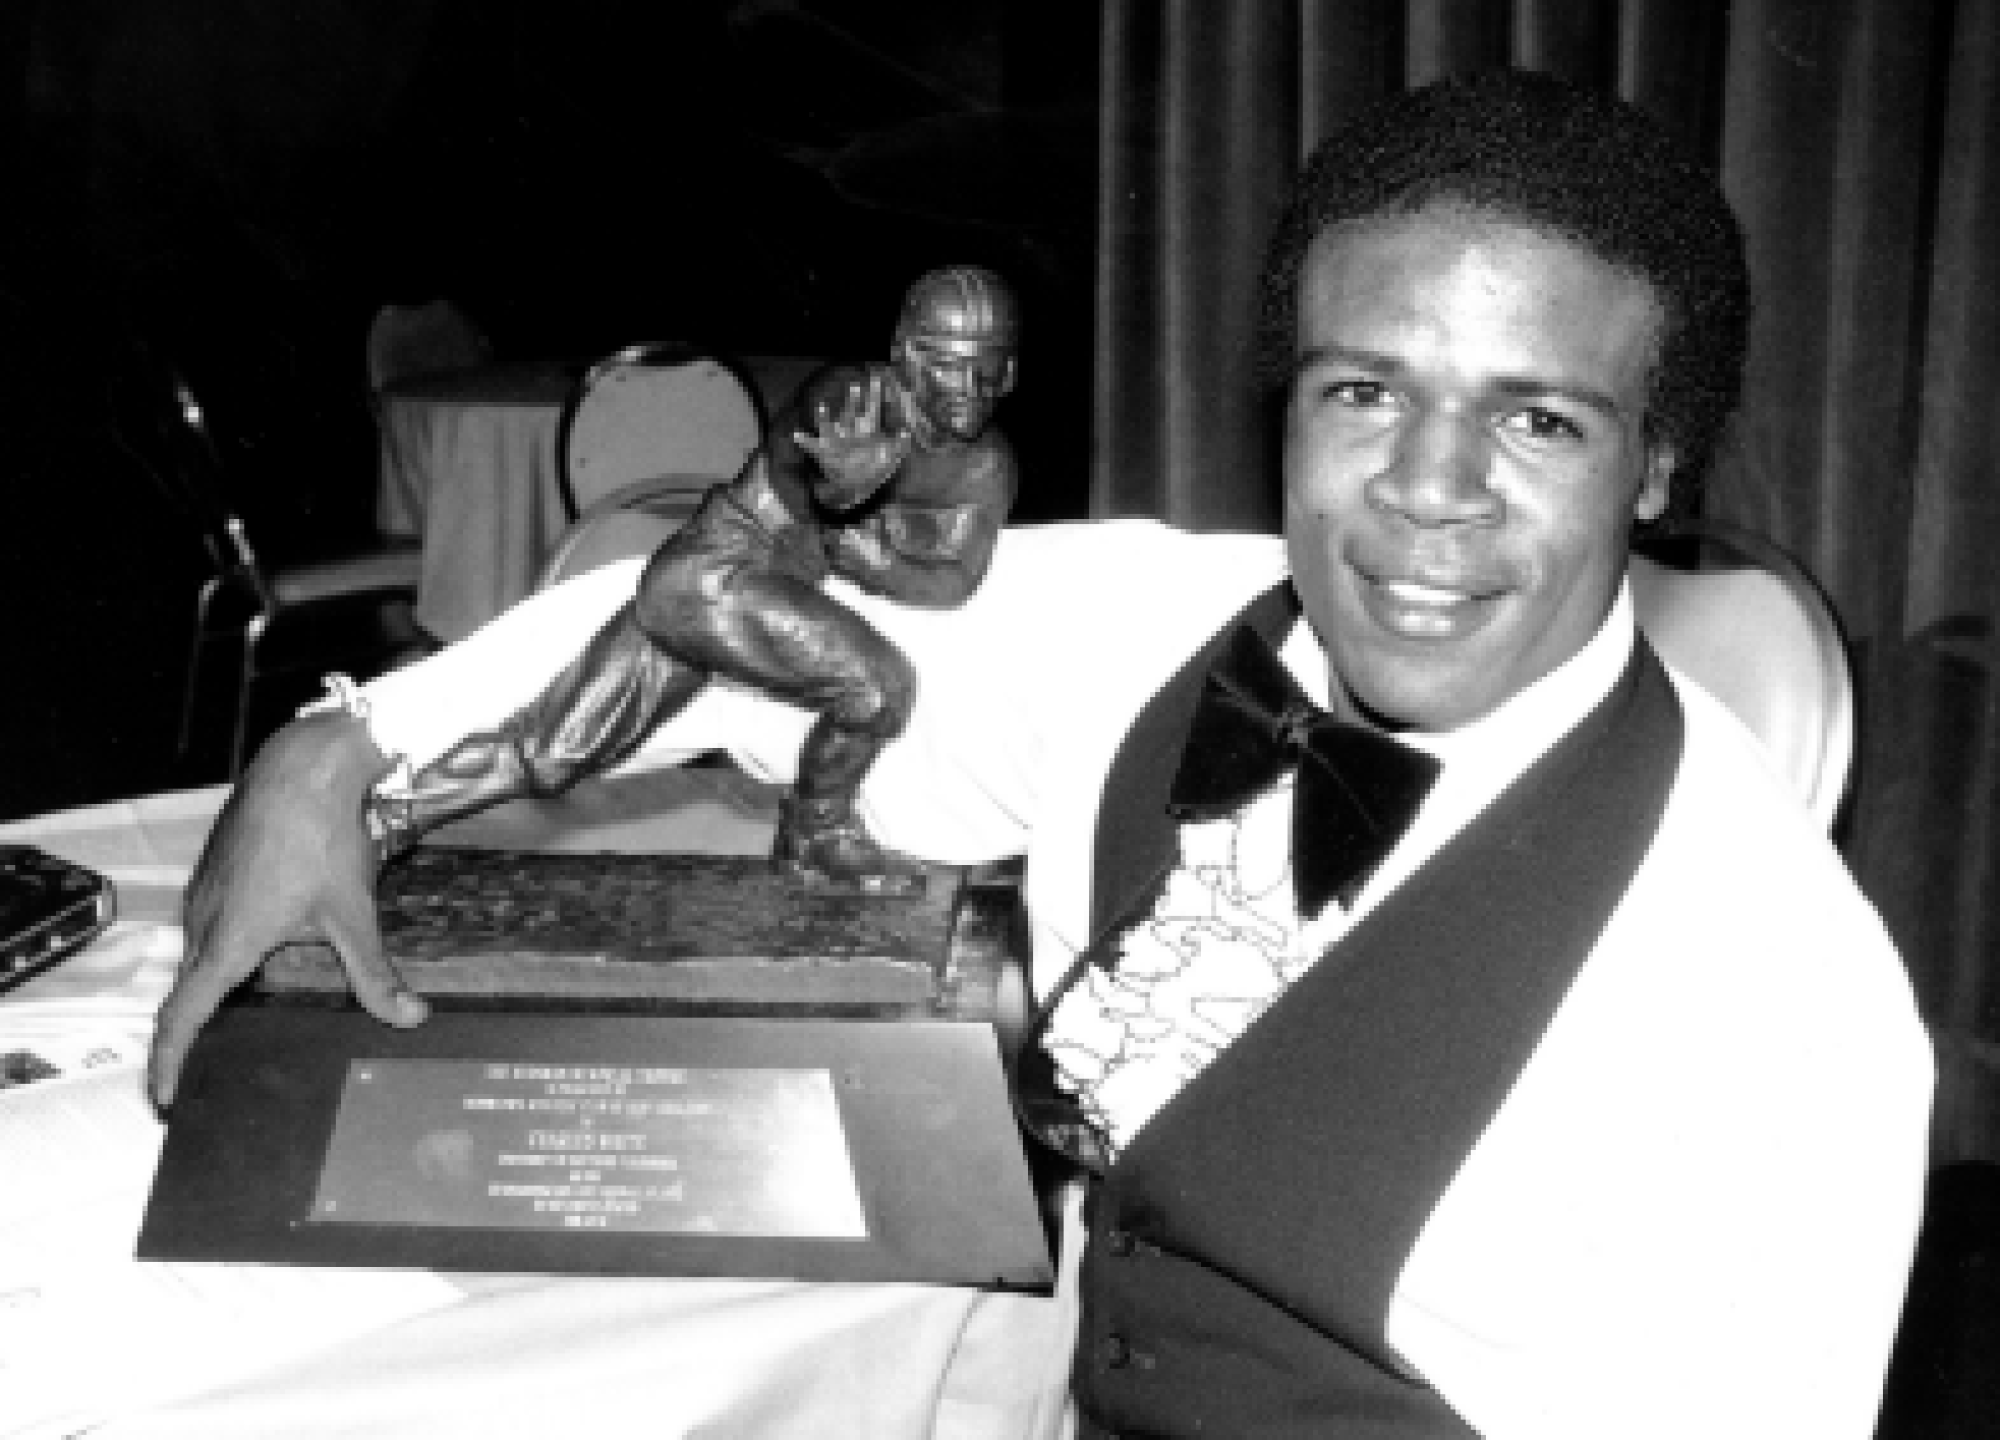 USC running back Charles White poses with the Heisman Trophy on December 12, 1979 in New York.